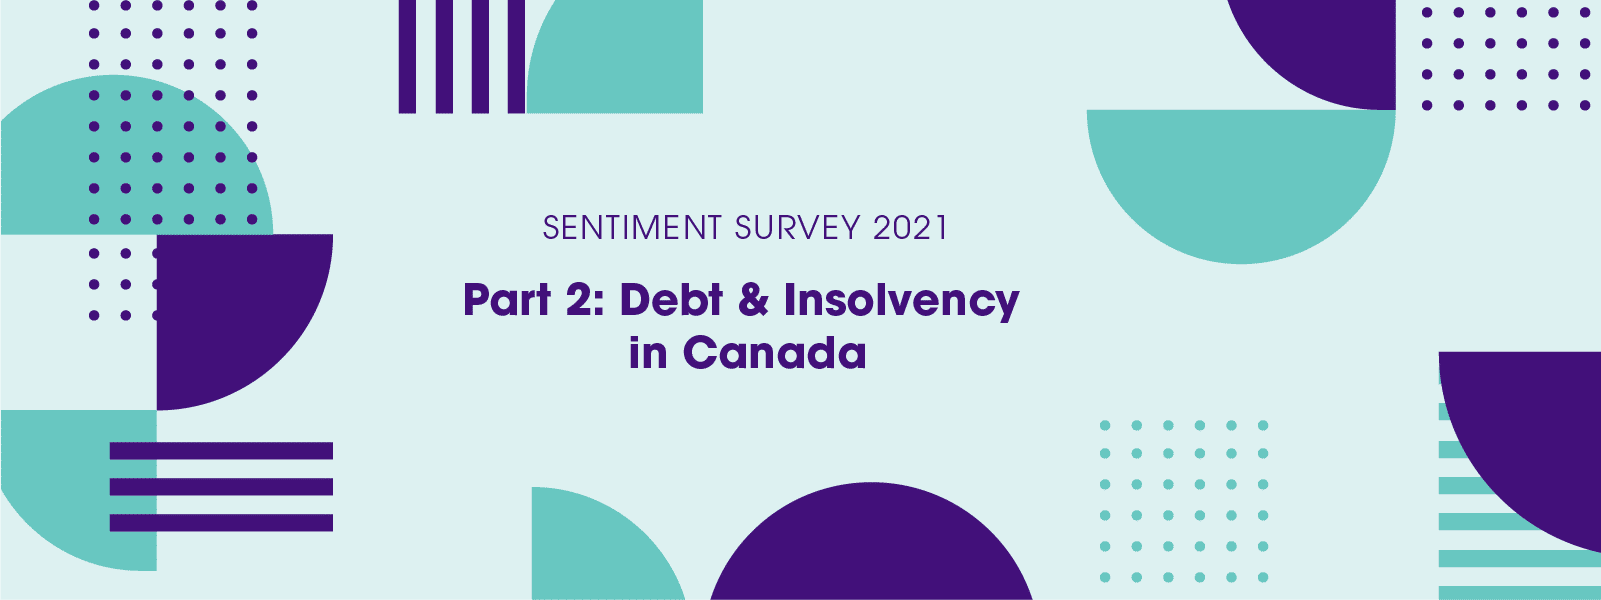 Debt and insolvency in Canada survey results 2021